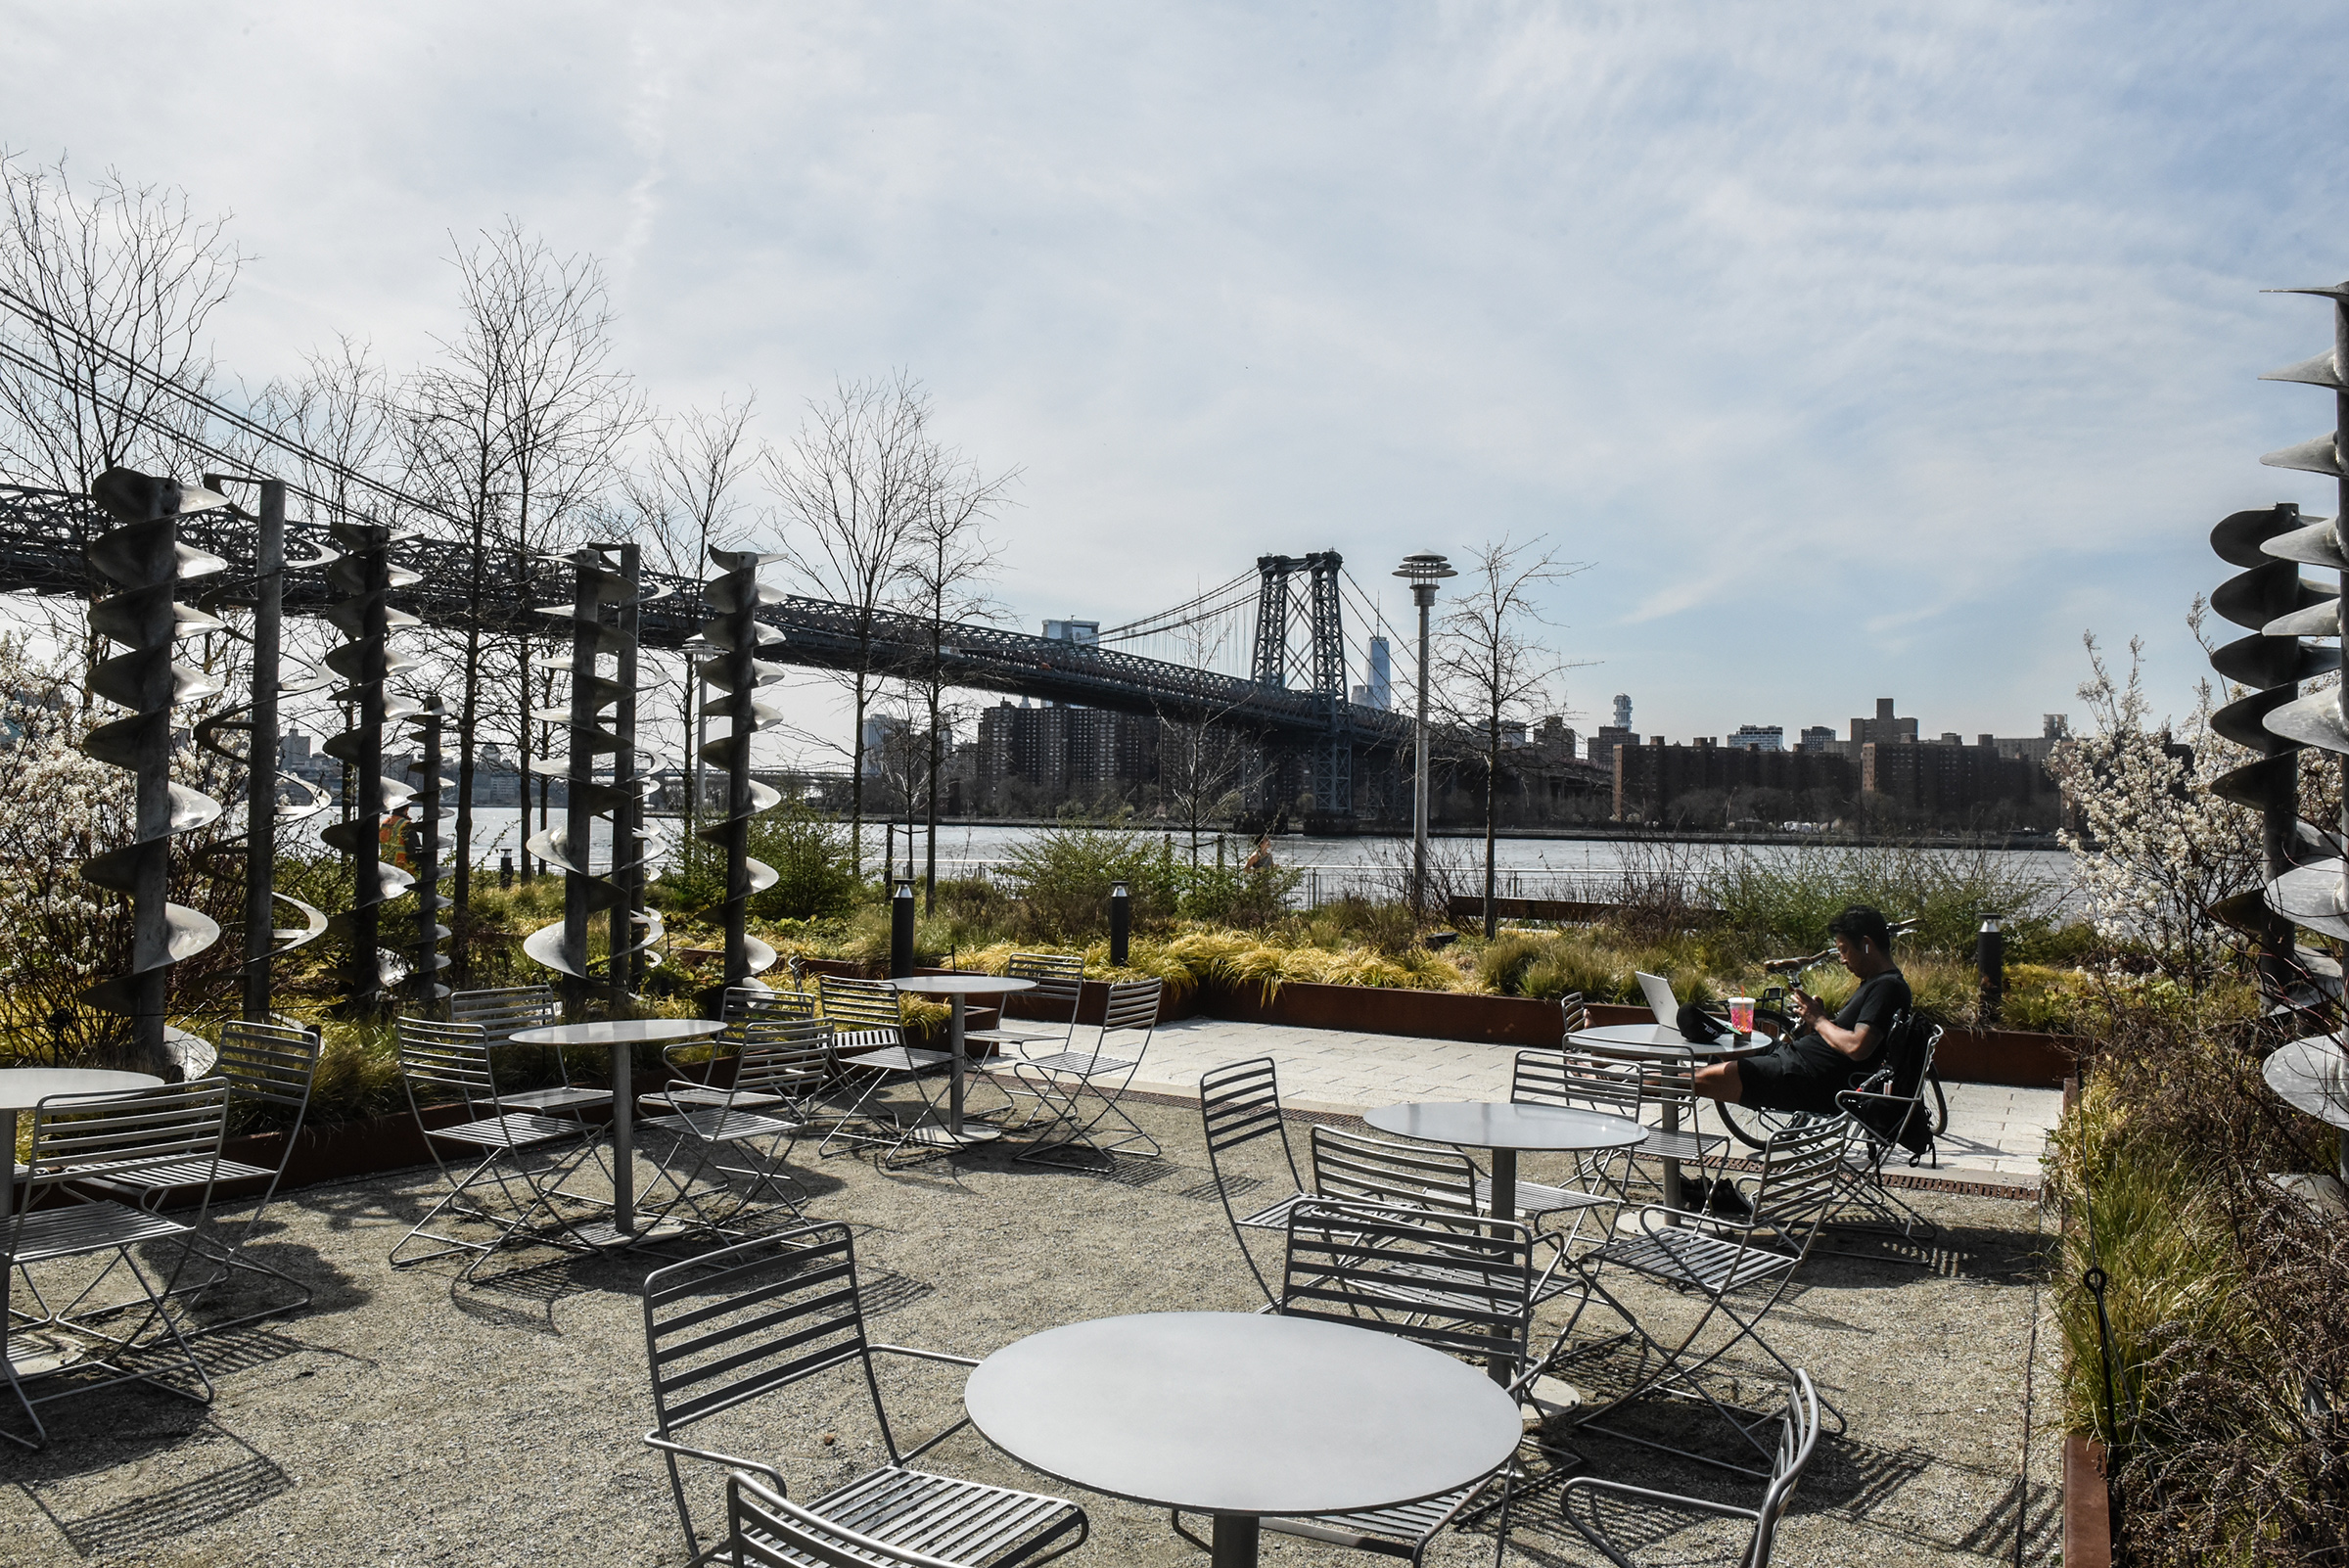 A person sits amongst empty tables and chairs at Domino Park in Williamsburg, Brooklyn on April 7 (Stephanie Keith—Bloomberg/Getty Images)